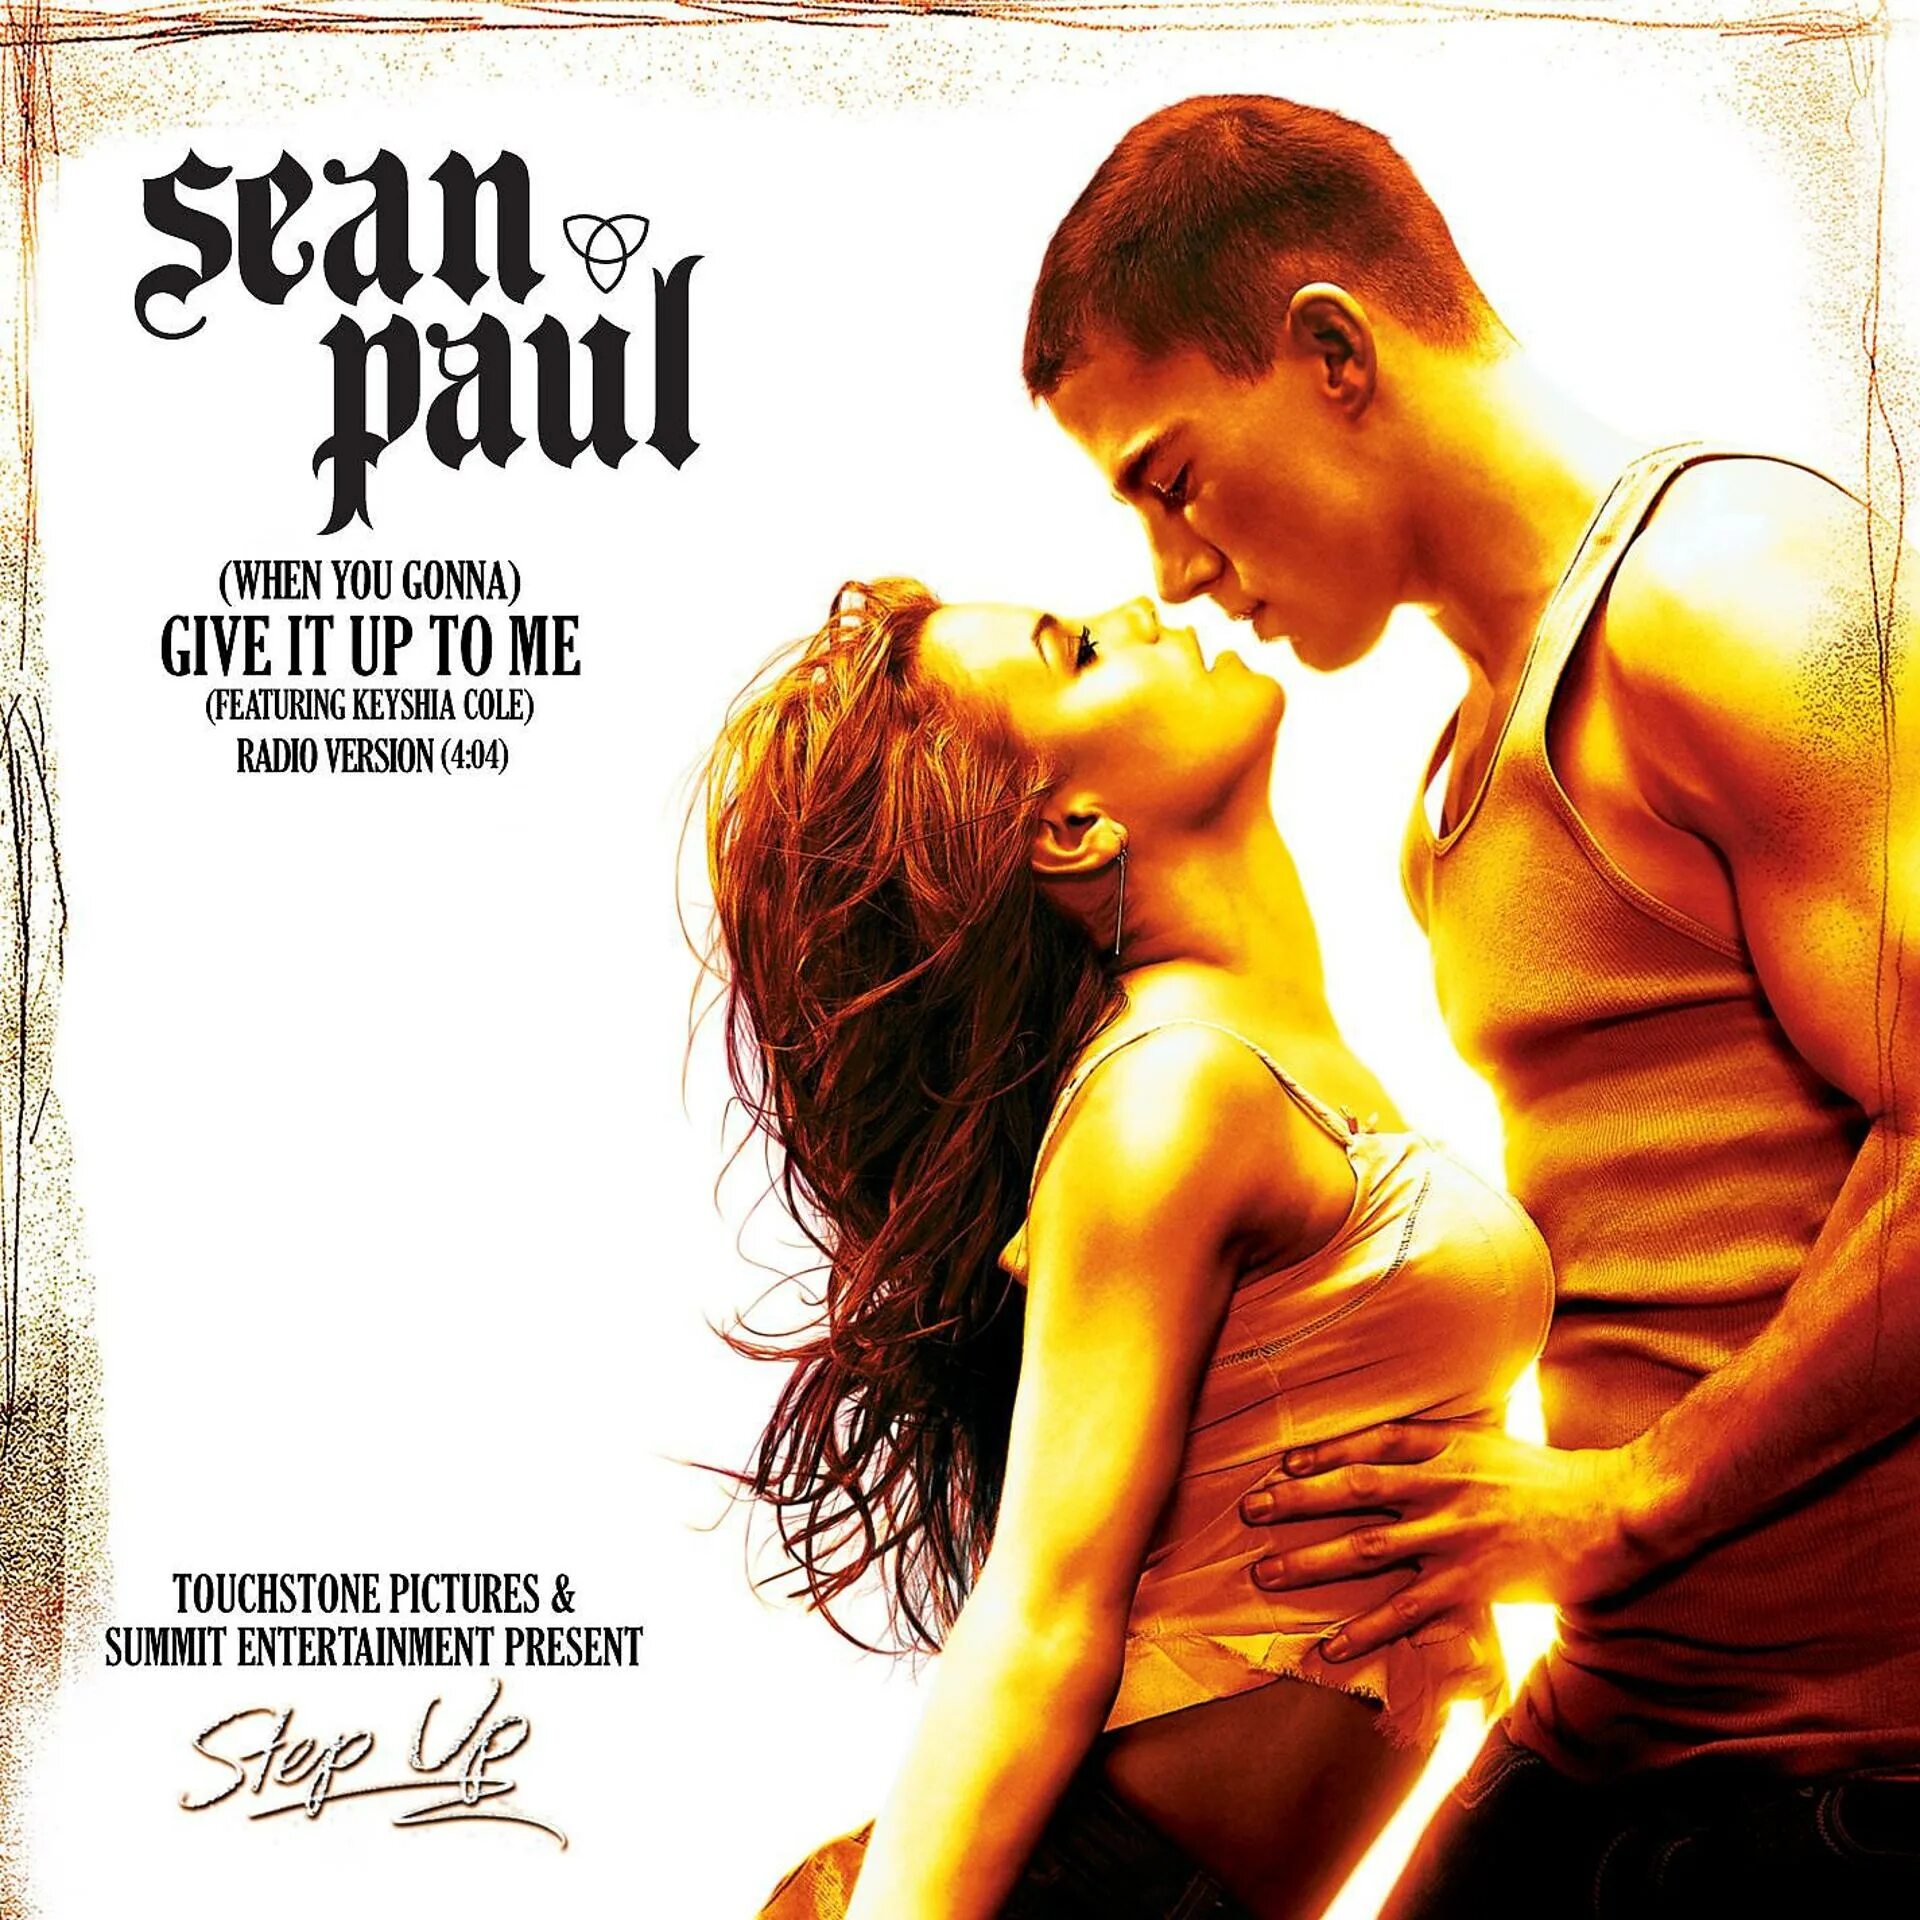 Give to me. Give it up to me Шон пол. Sean Paul feat. Keyshia Cole - (when you gonna) give it up to me. Sean Paul give. Sean Paul give up to me.